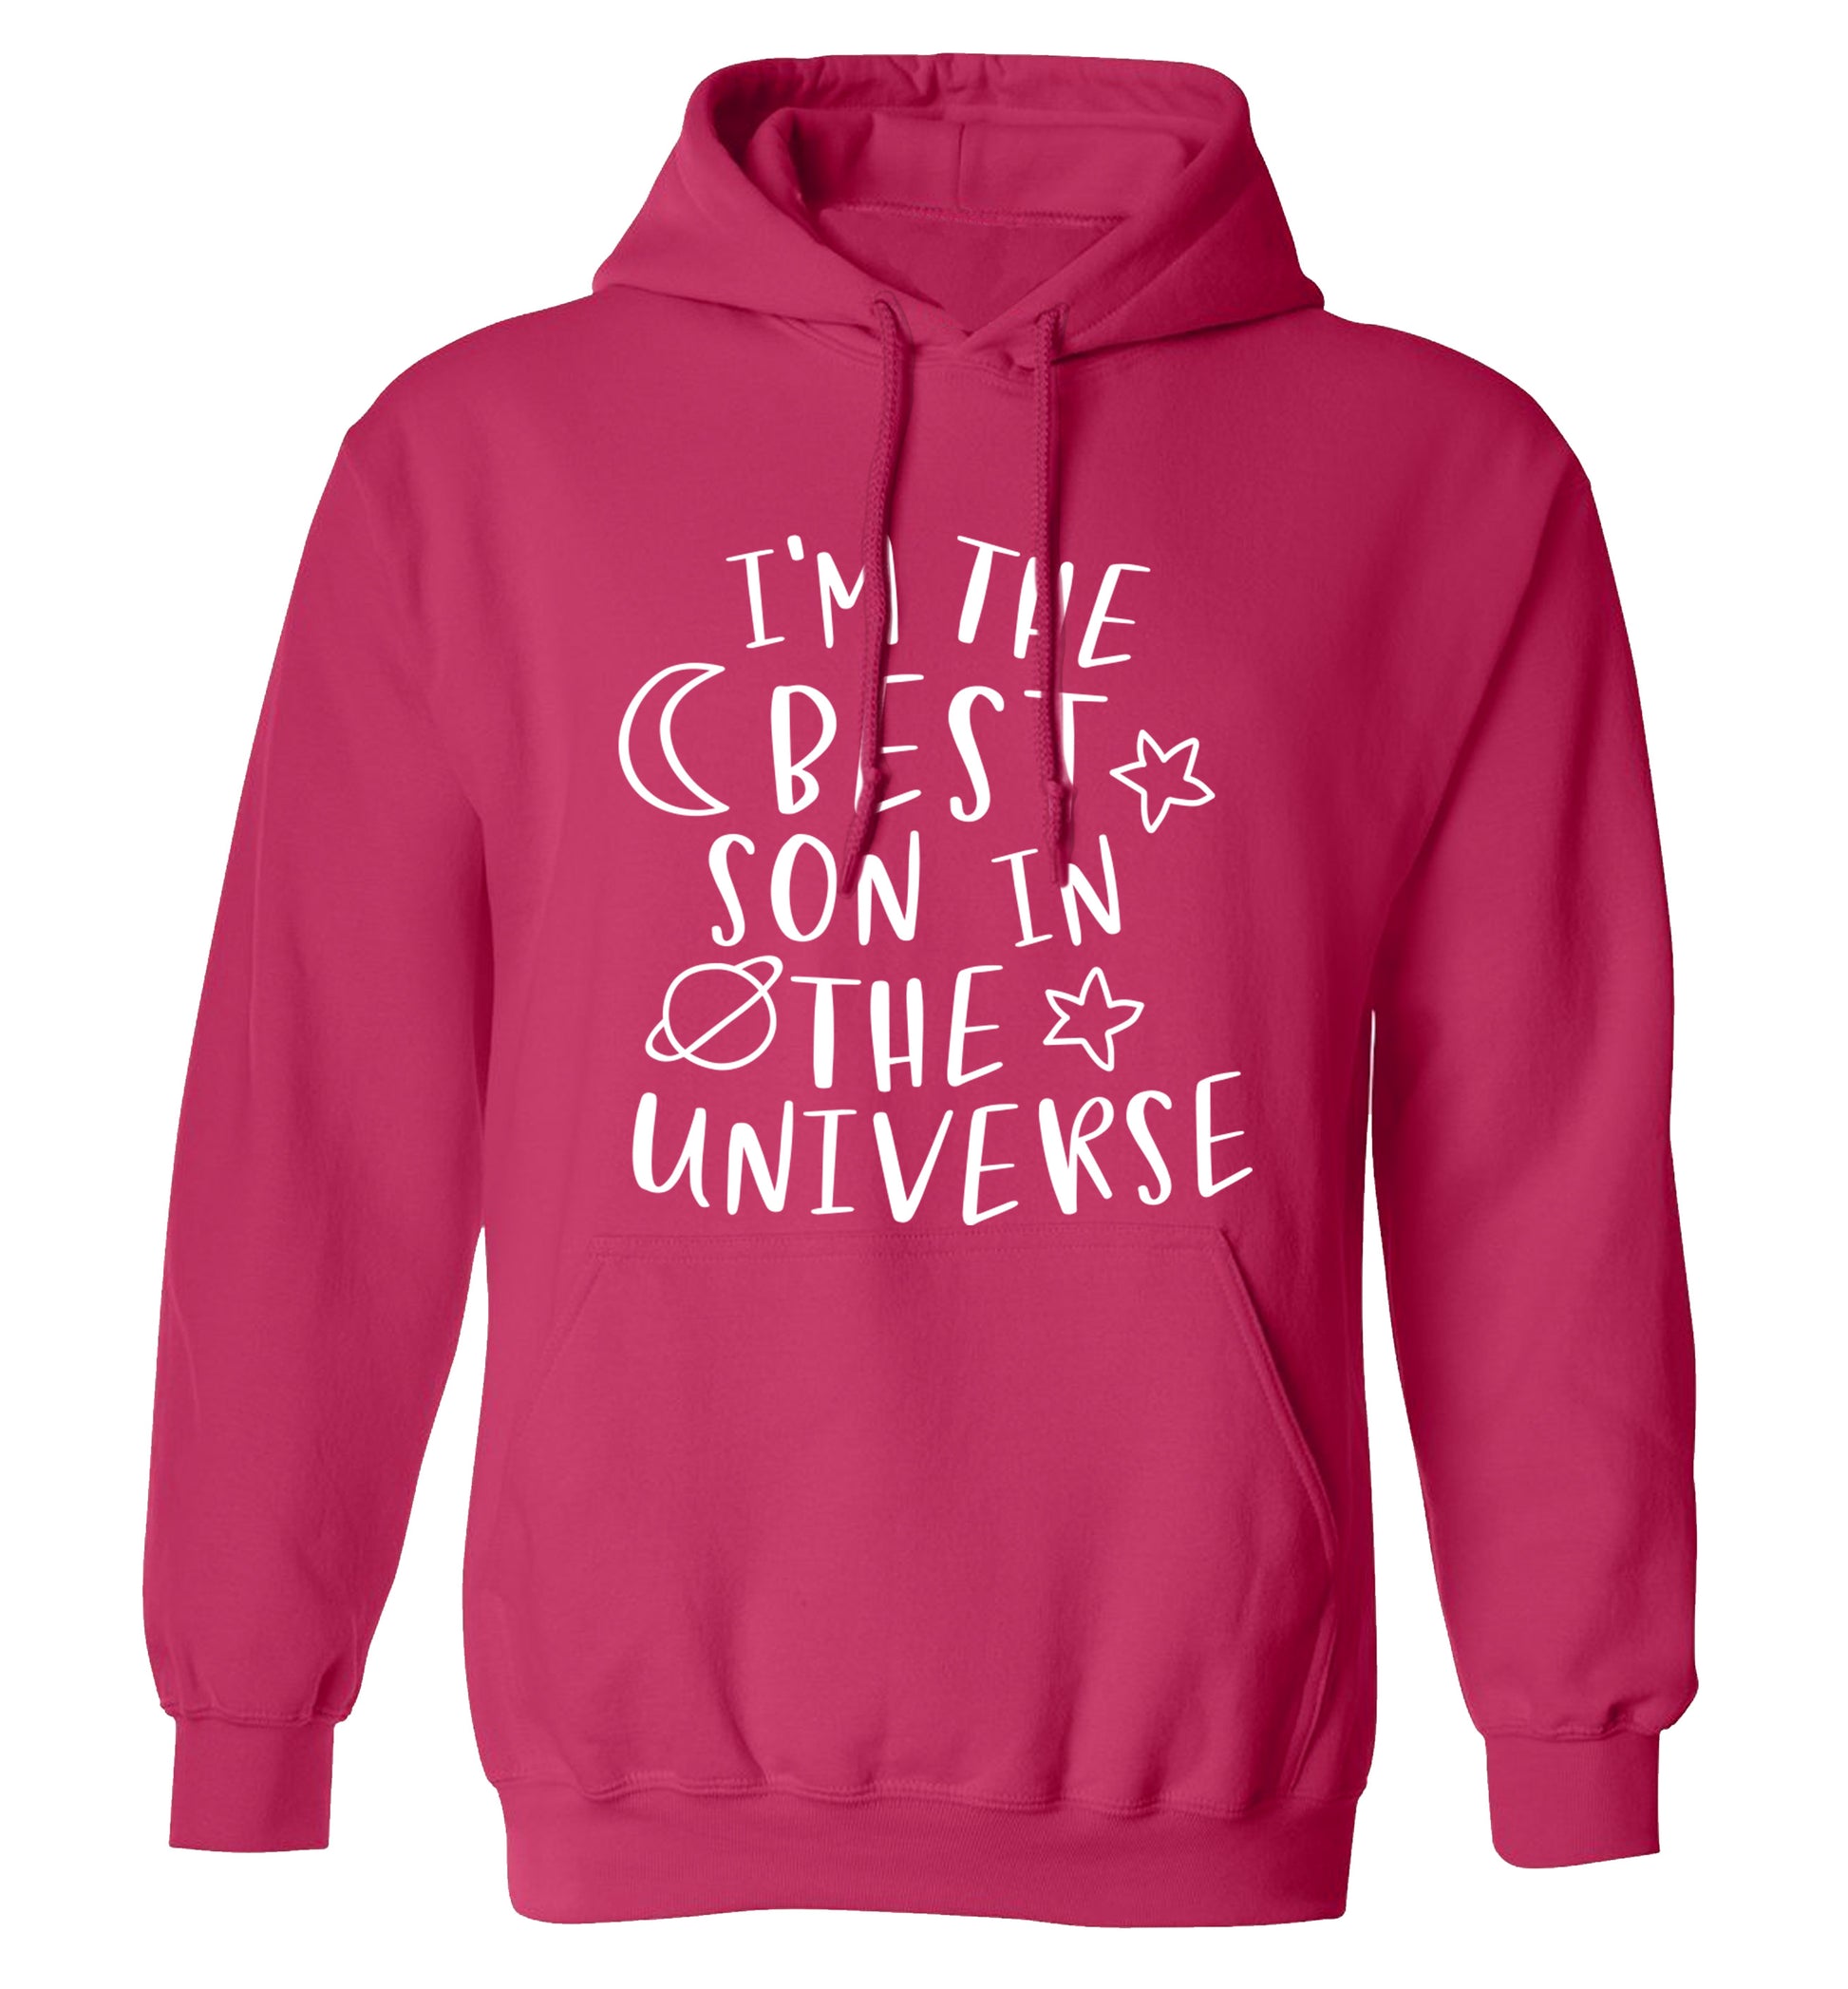 I'm the best son in the universe adults unisex pink hoodie 2XL